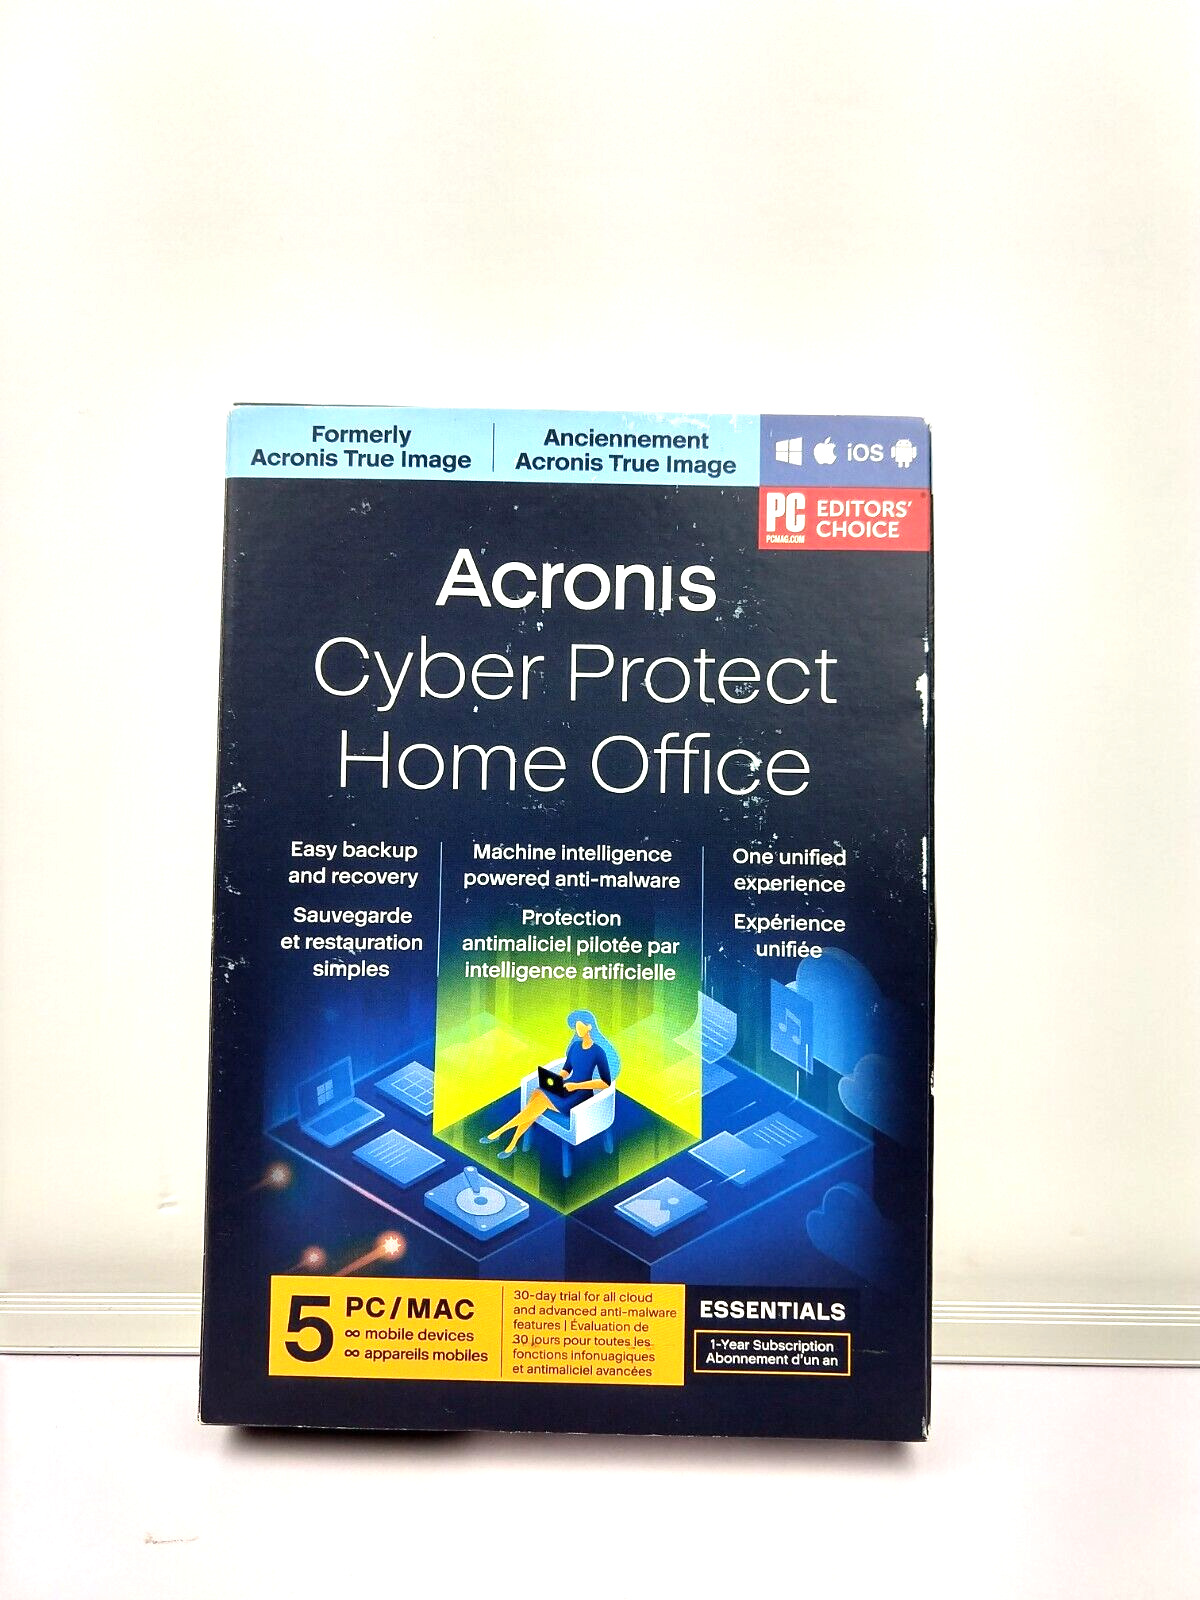 ACRONIS CYBER PROTECT HOME OFFICE ESSENTIALS, FOR 5 PC/MAC. NEW - SEALED